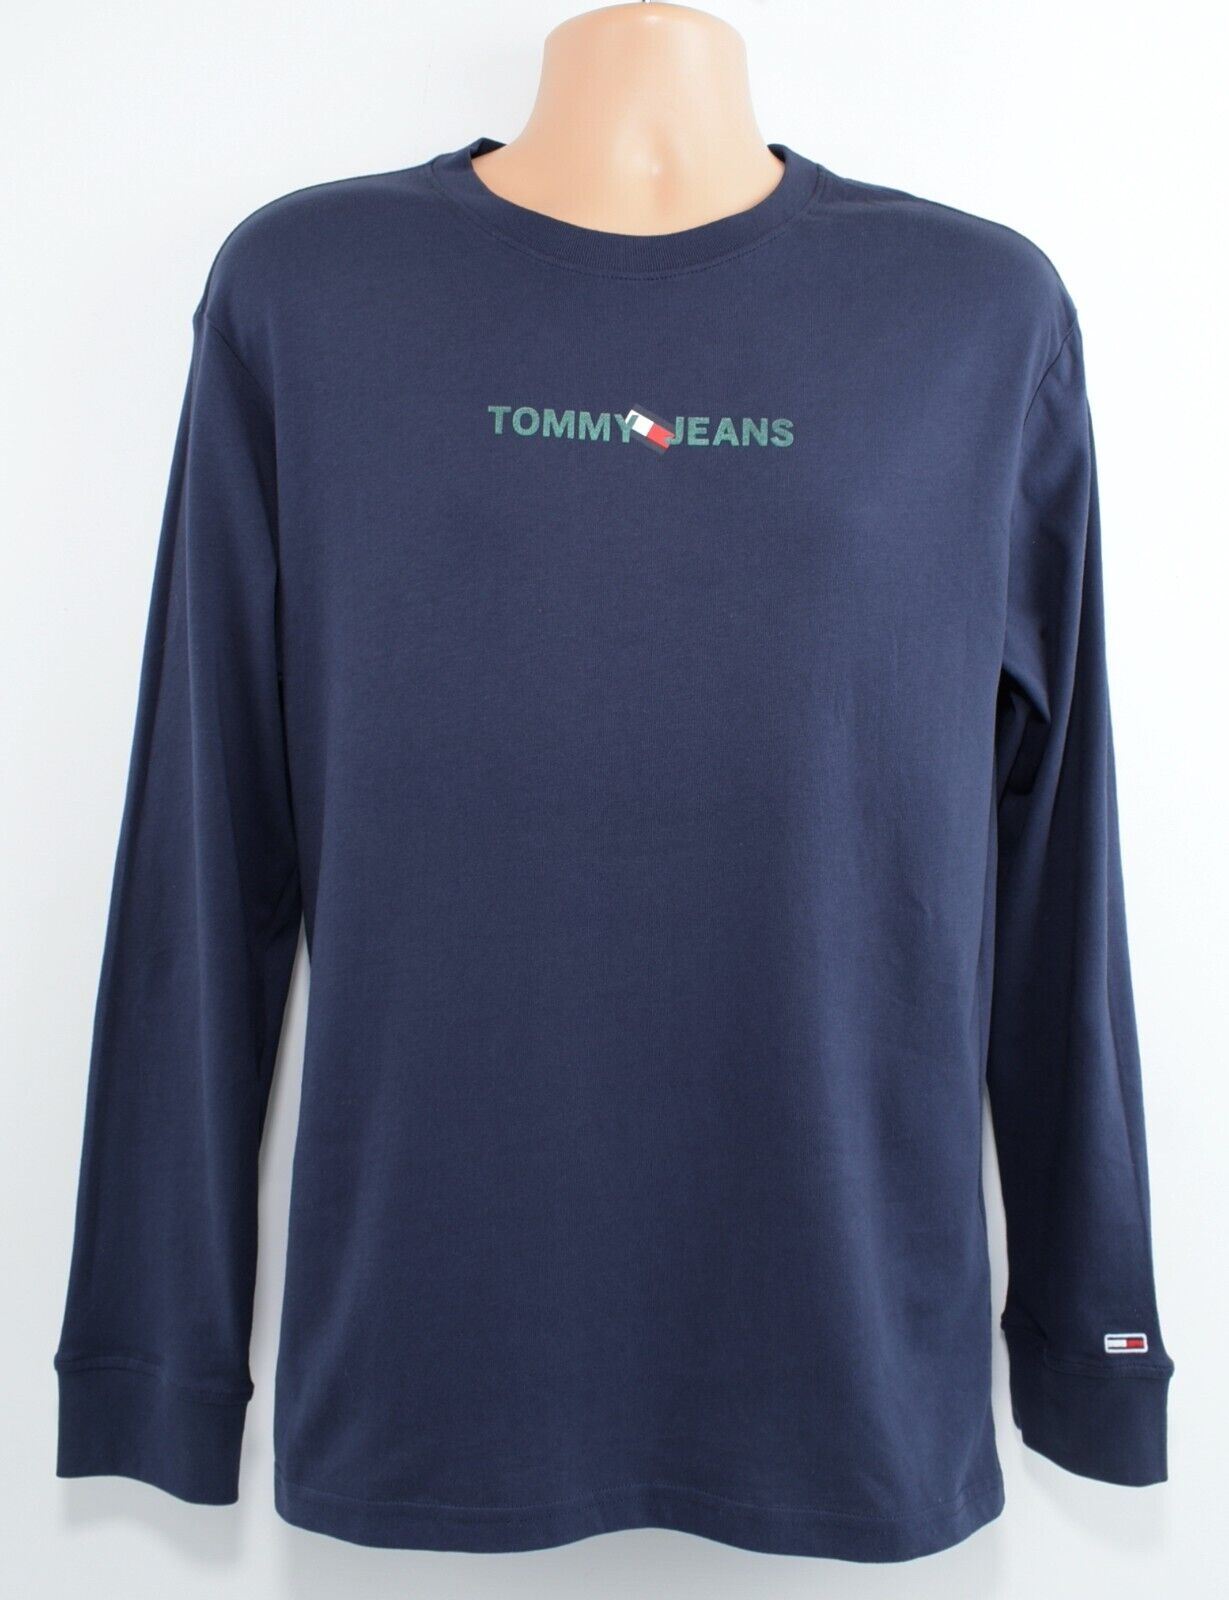 TOMMY HILFIGER Men's Long Sleeve Front & Back Logo Top, Navy Blue, size SMALL